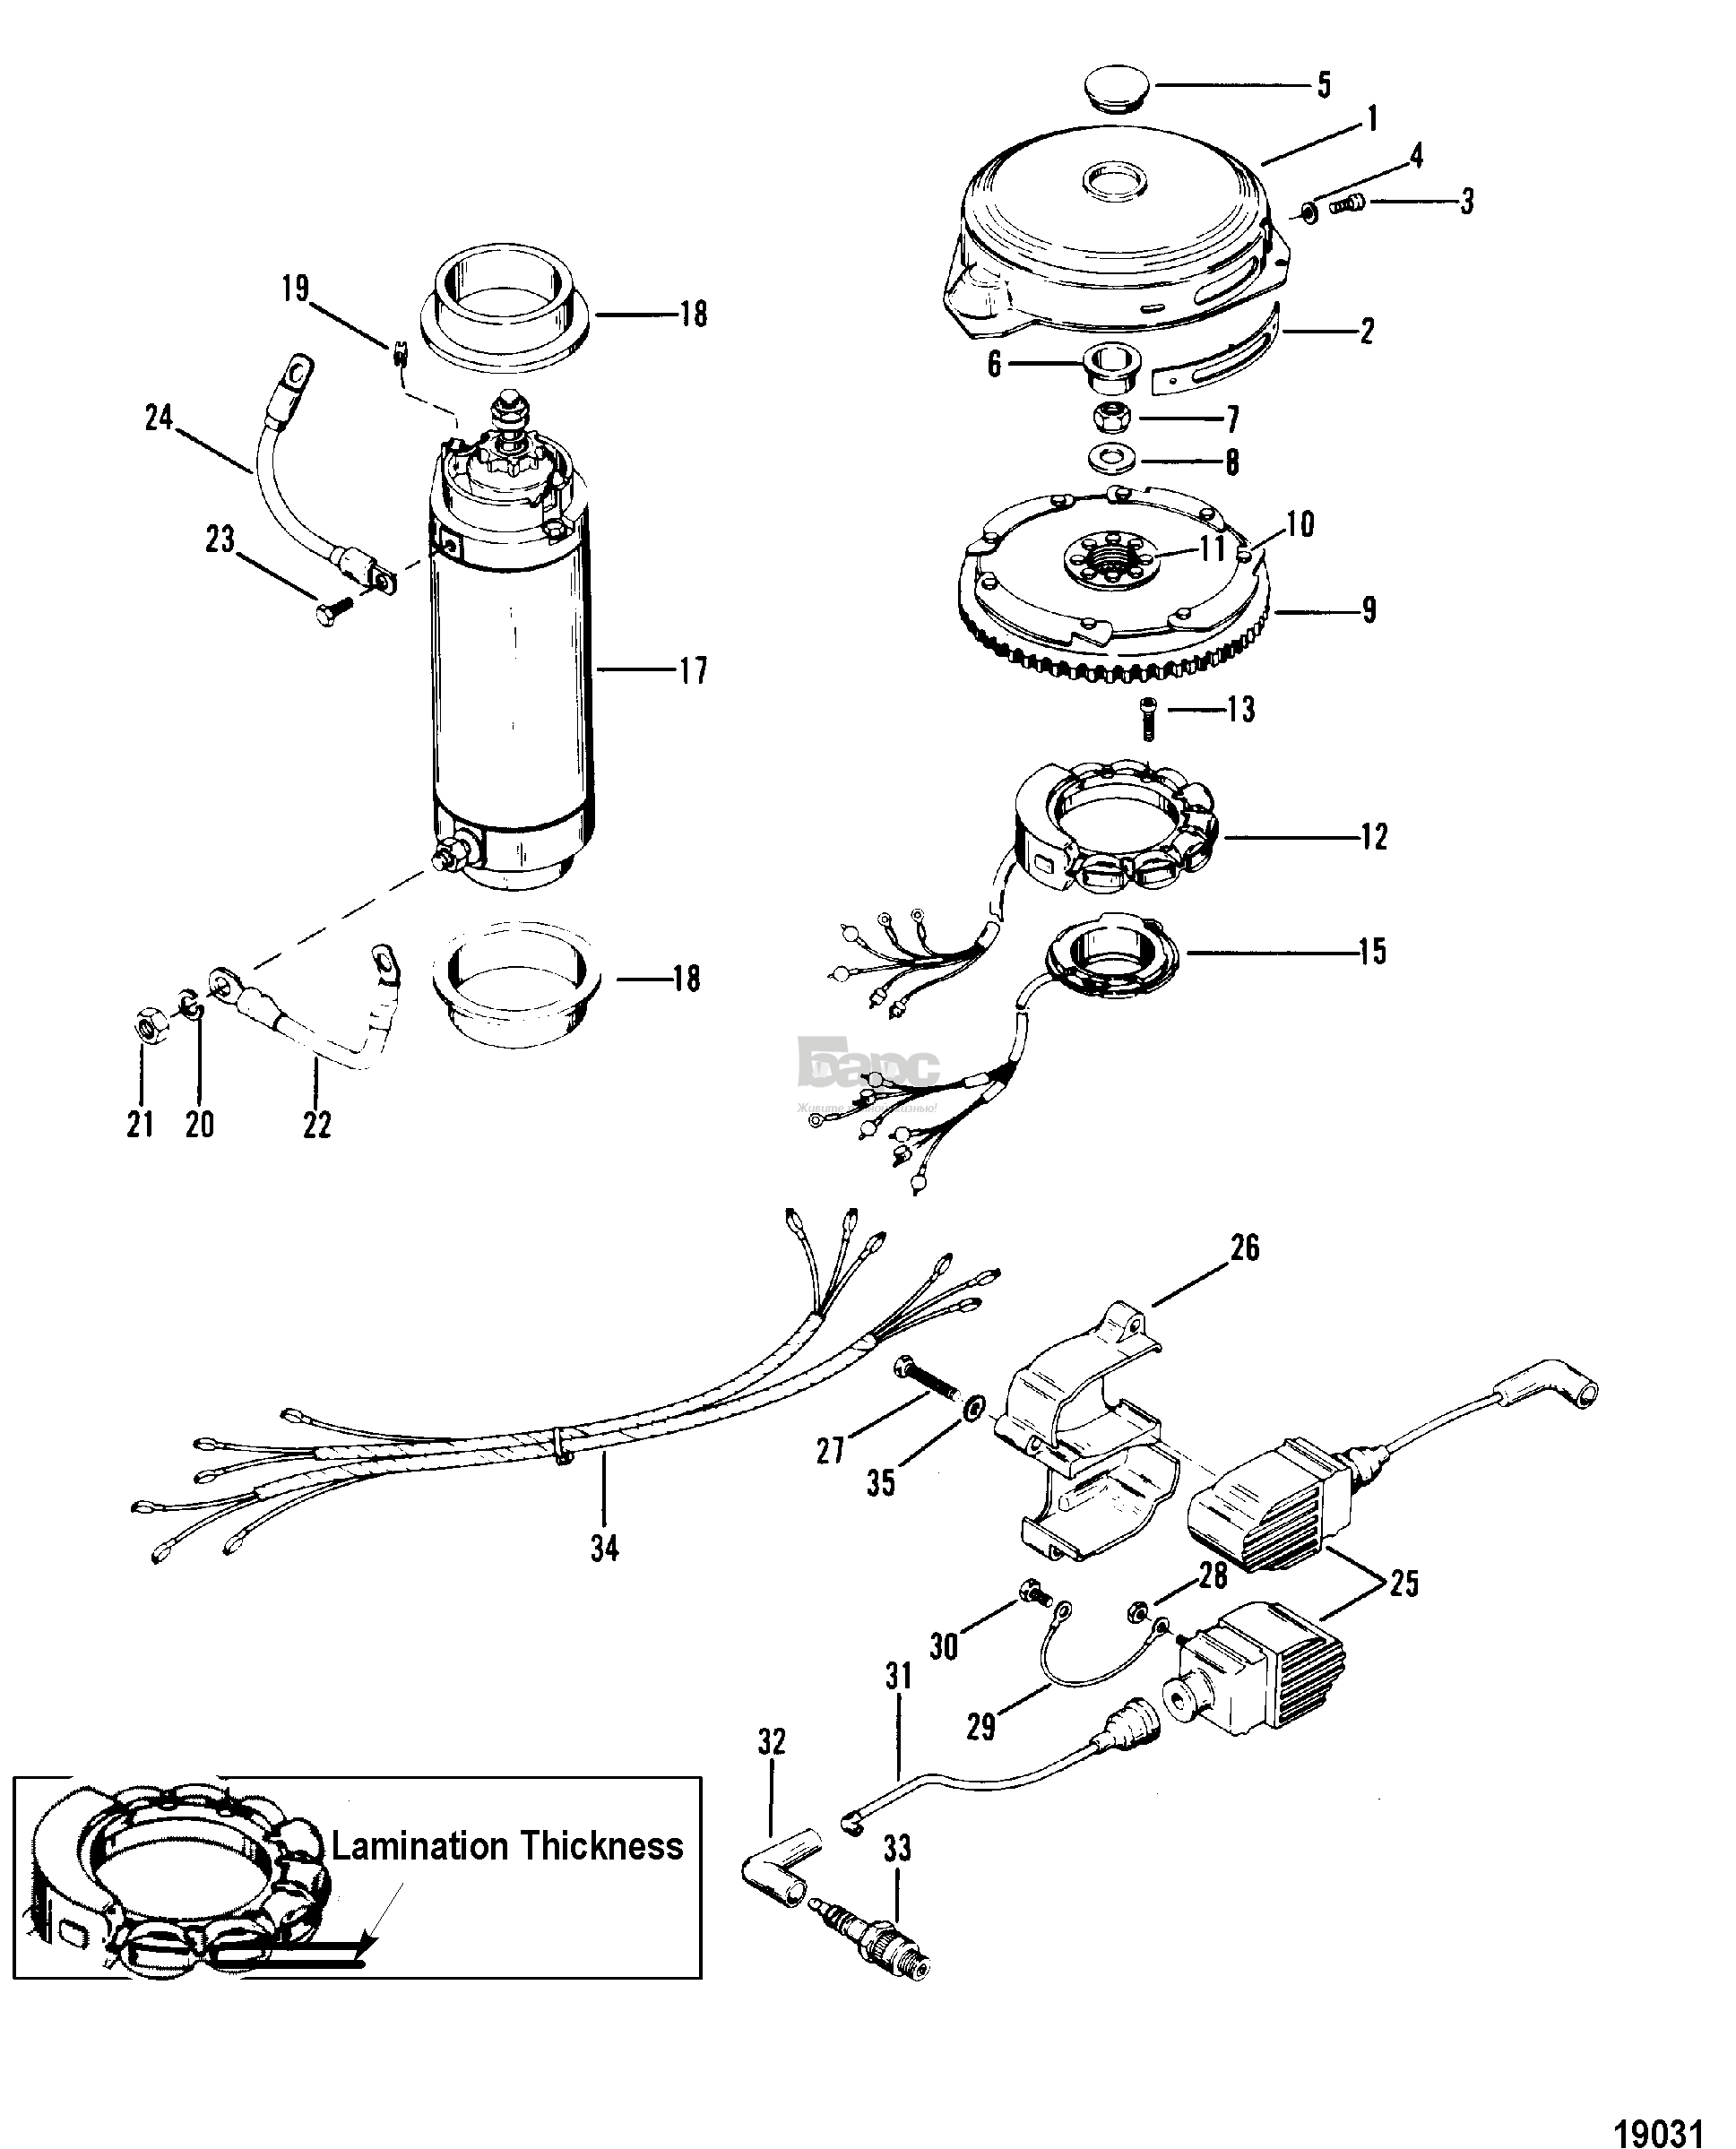 Flywheel, Starter Motor and Ignition Coils